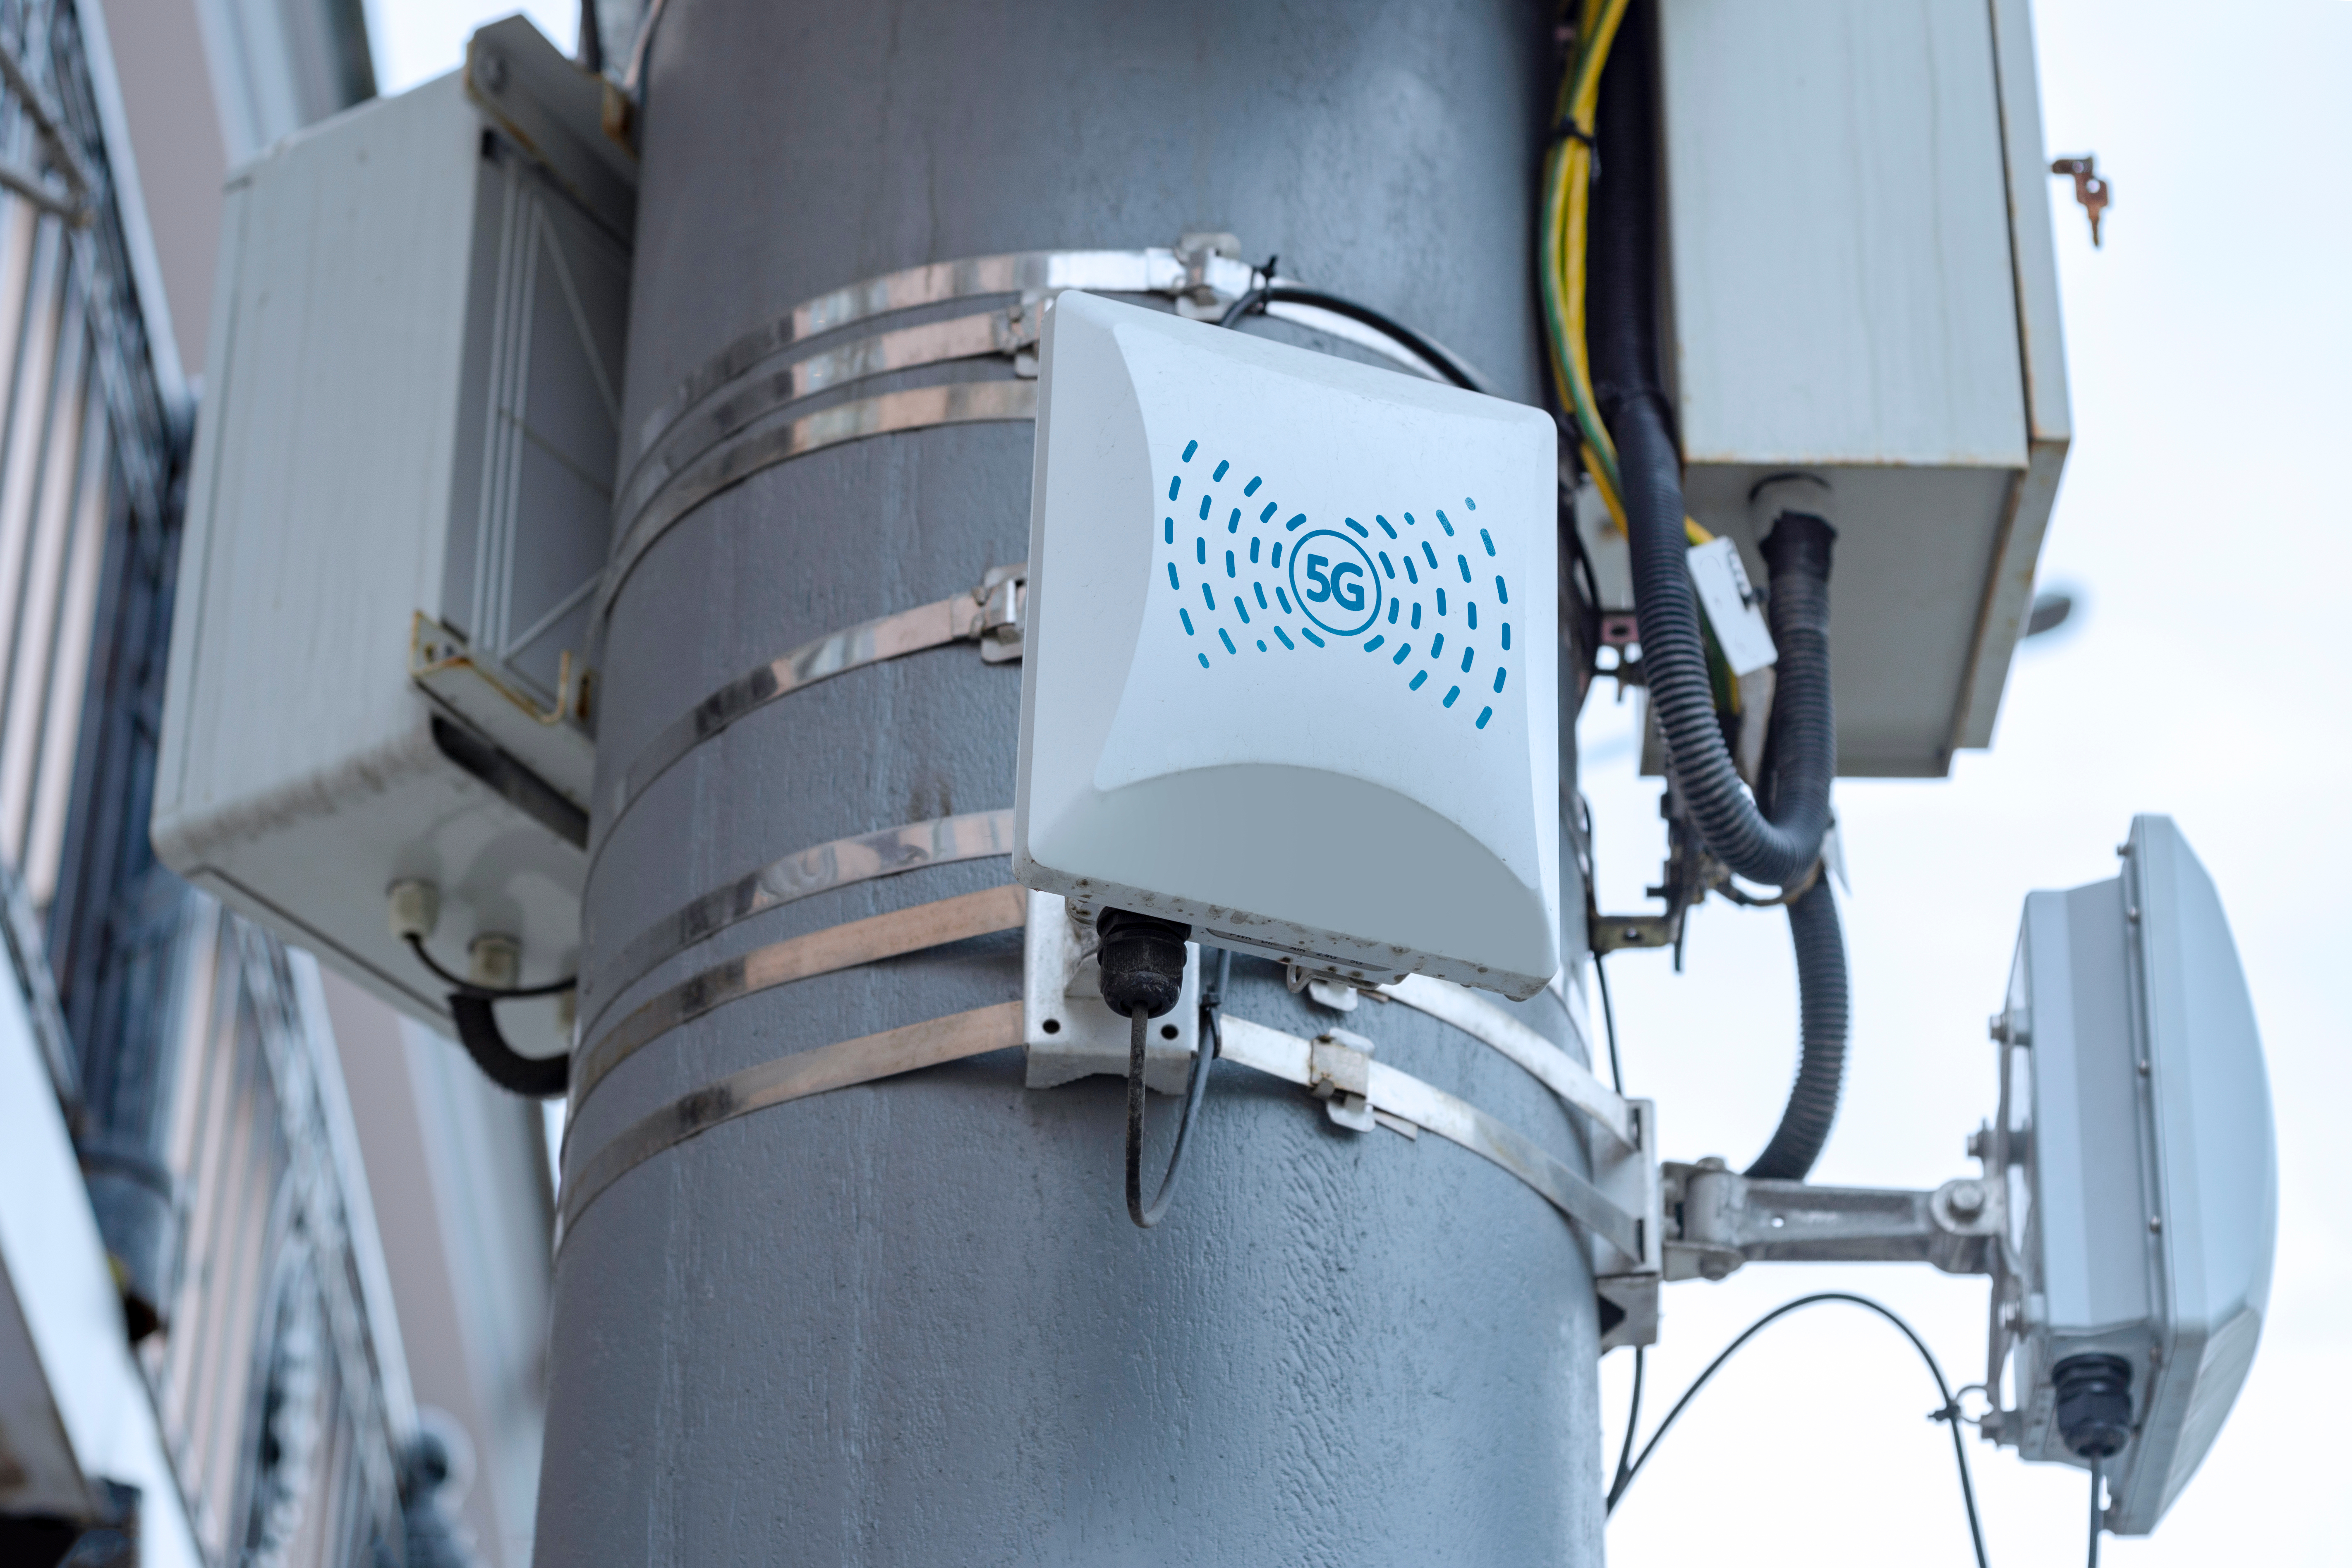 A photograph of a 5G antenna mounted on a base station.